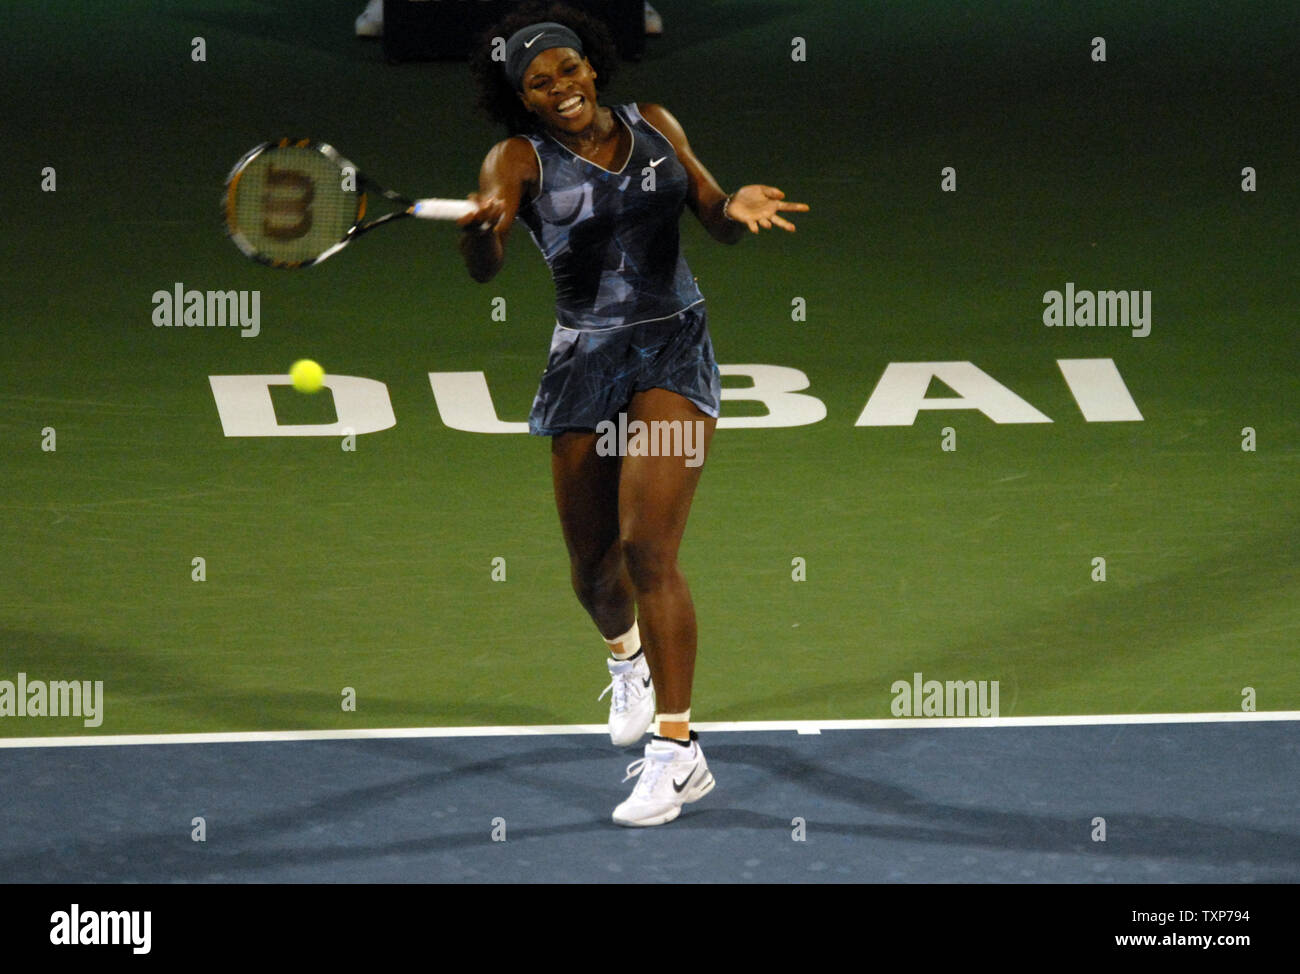 The world No. 1, Serena Williams from the United States returns the ball from her opponent Jie Zheng, the world No. 20, from China on the fourth day of the Women's Dubai Championships,  Wednesday February 18, 2009.   Williams won the match 6-4, 6-2.(UPI Photo/Norbert Schiller) Stock Photo